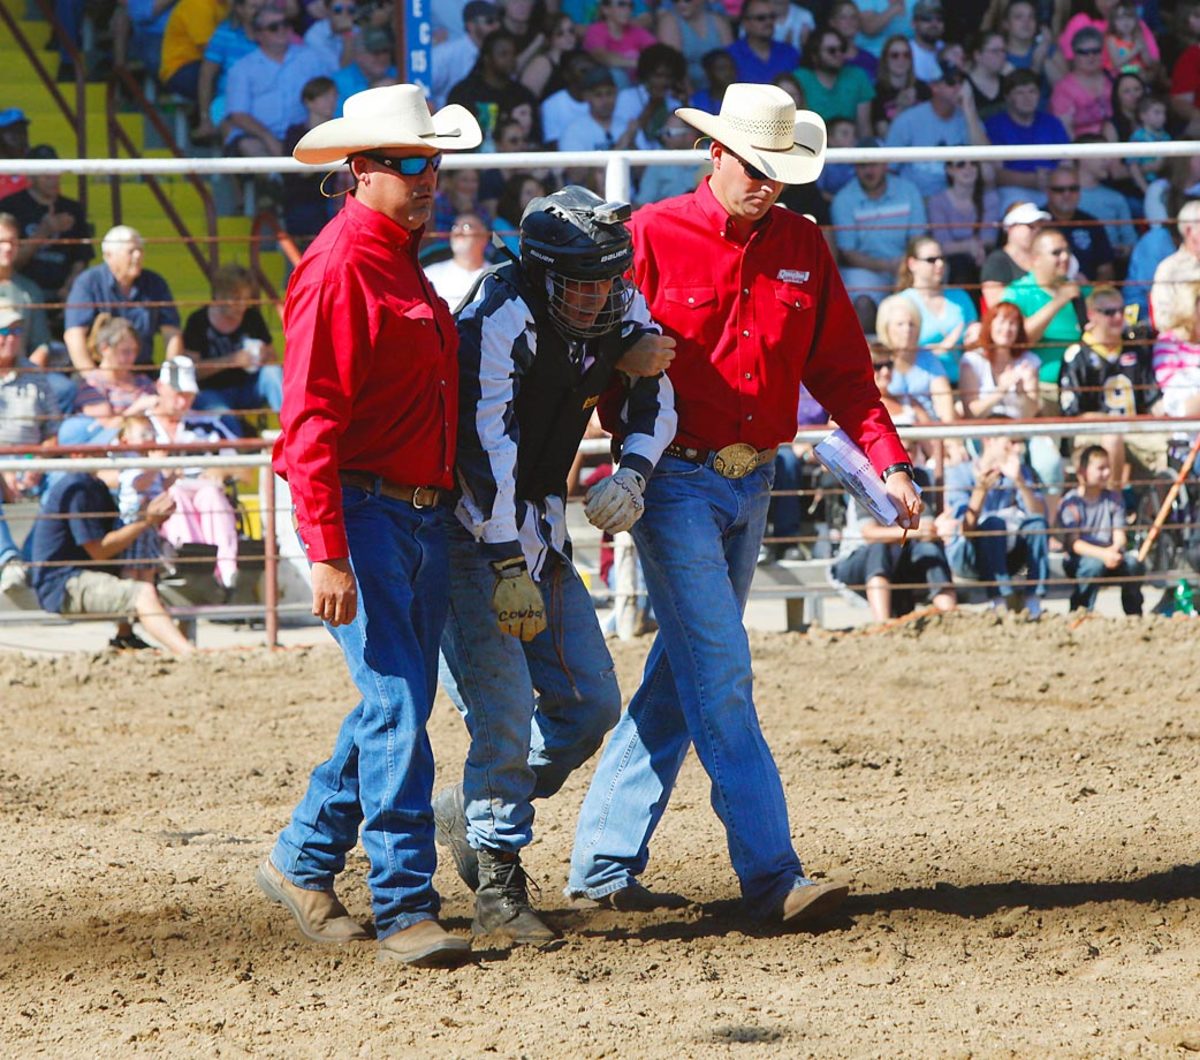 Angola Prison Rodeo - Sports Illustrated